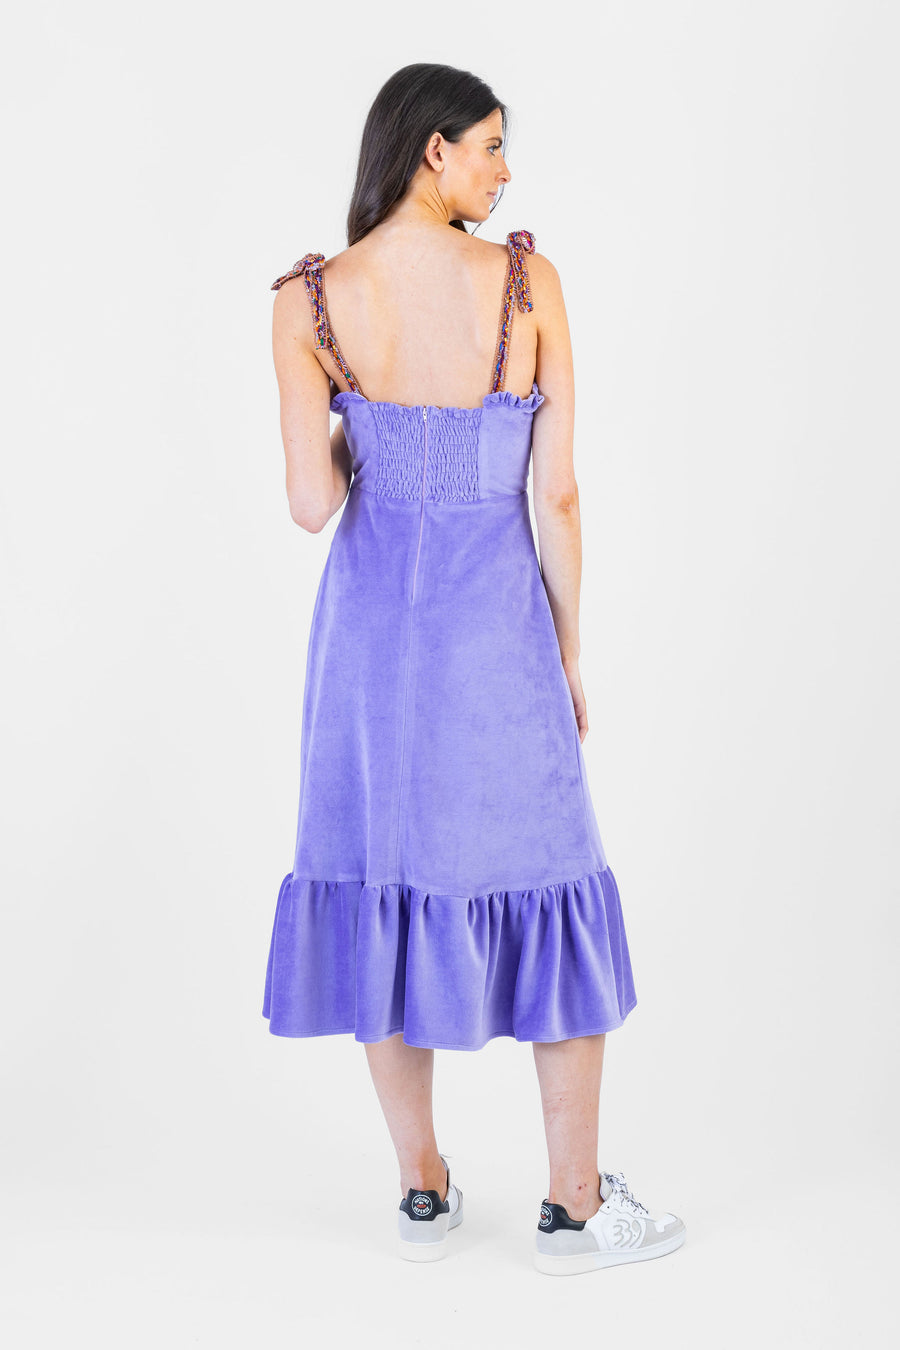 Meredith Dress Grape Velour *Limited*Edition*